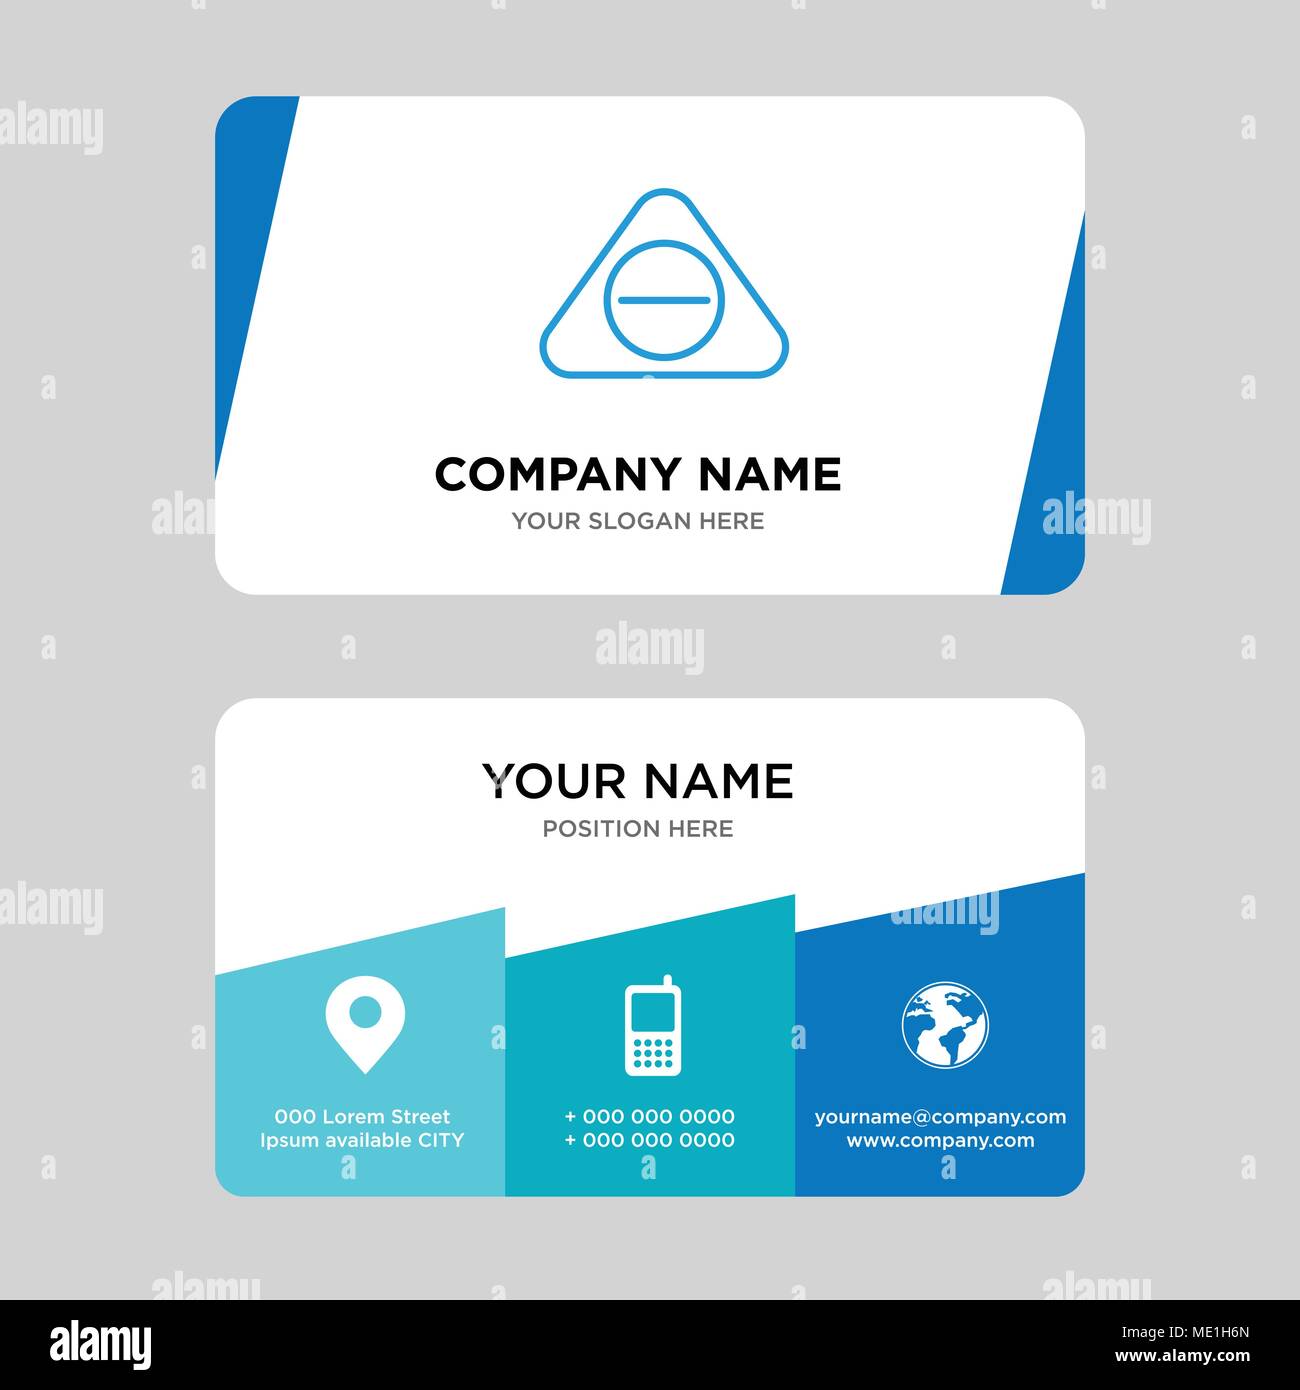 Subtracting button business card design template, Visiting for your company, Modern Creative and Clean identity Card Vector Illustration Stock Vector